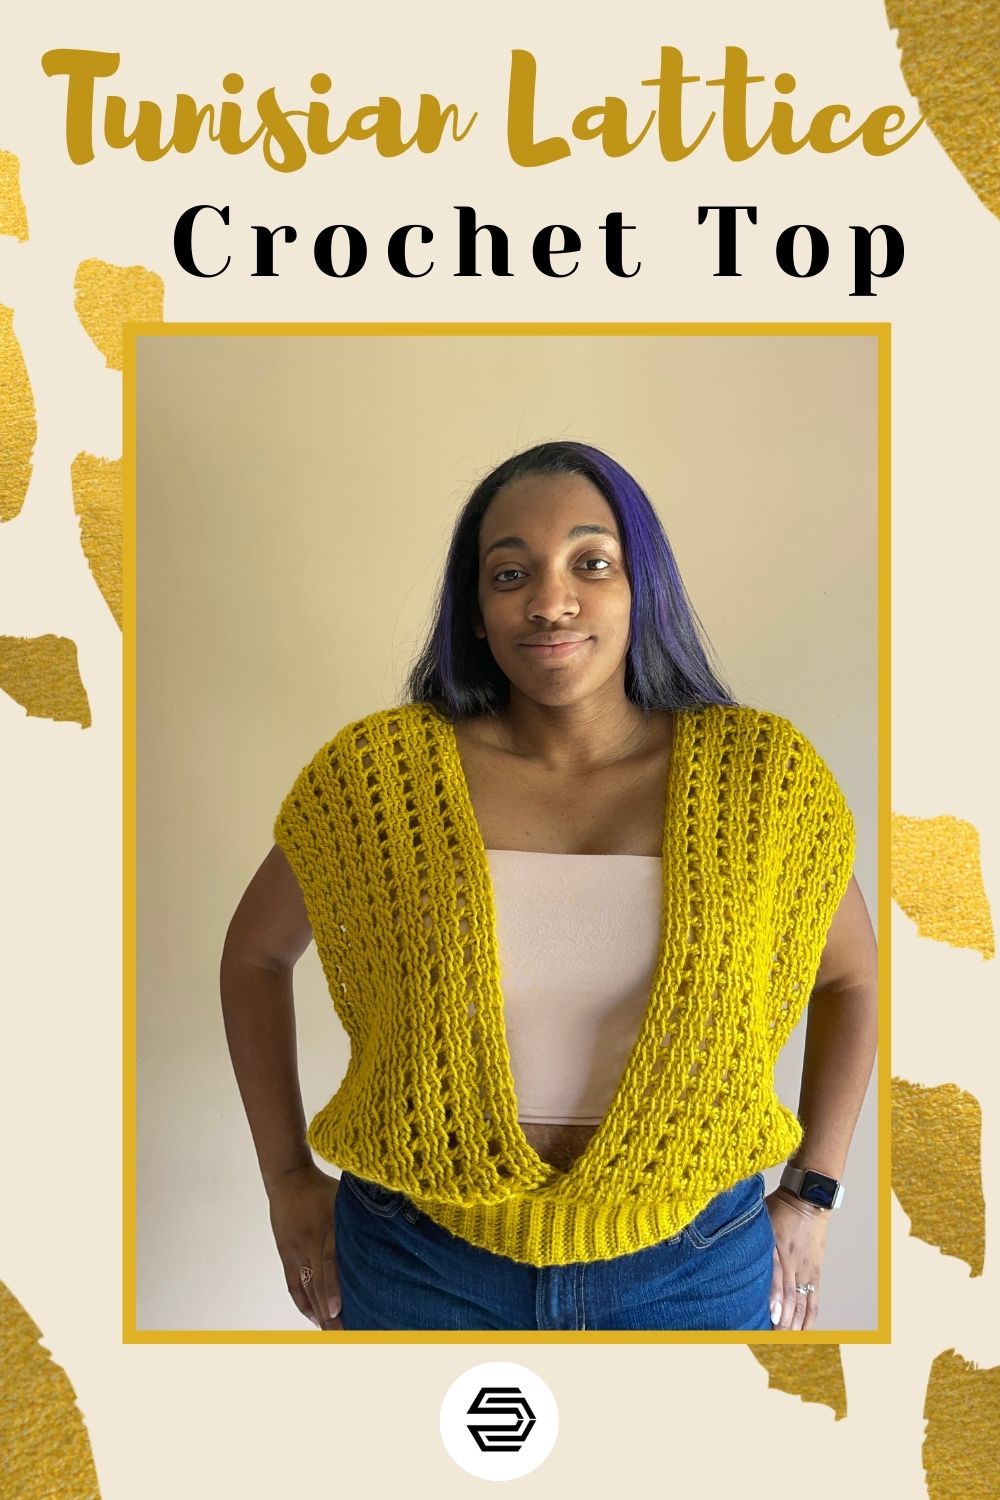 The Tunisian Lattice Top is an easy, fast tunisian crochet lace garment. It requires only three stitches to make this easy to wear and layer top for summer activities, or layer for cool weather days. #creationsbycourtney #freecrochetpattern